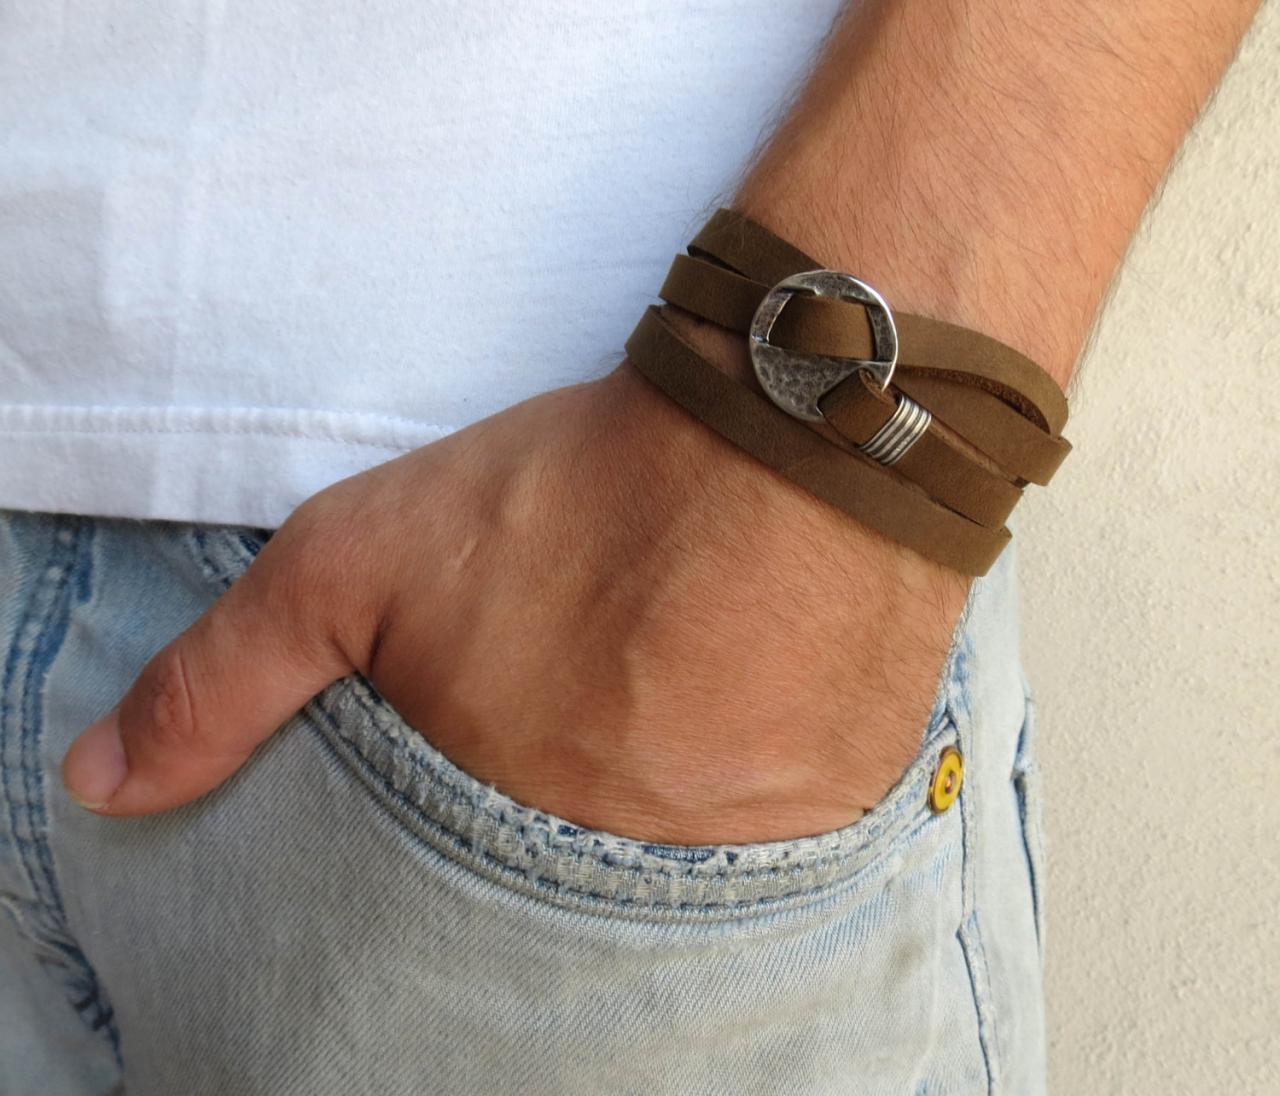 Men's Bracelet - Light Brown Leather Bracelet With Silver Circle Element - Men's Jewelry - Geometric Jewelry - Gift For Him